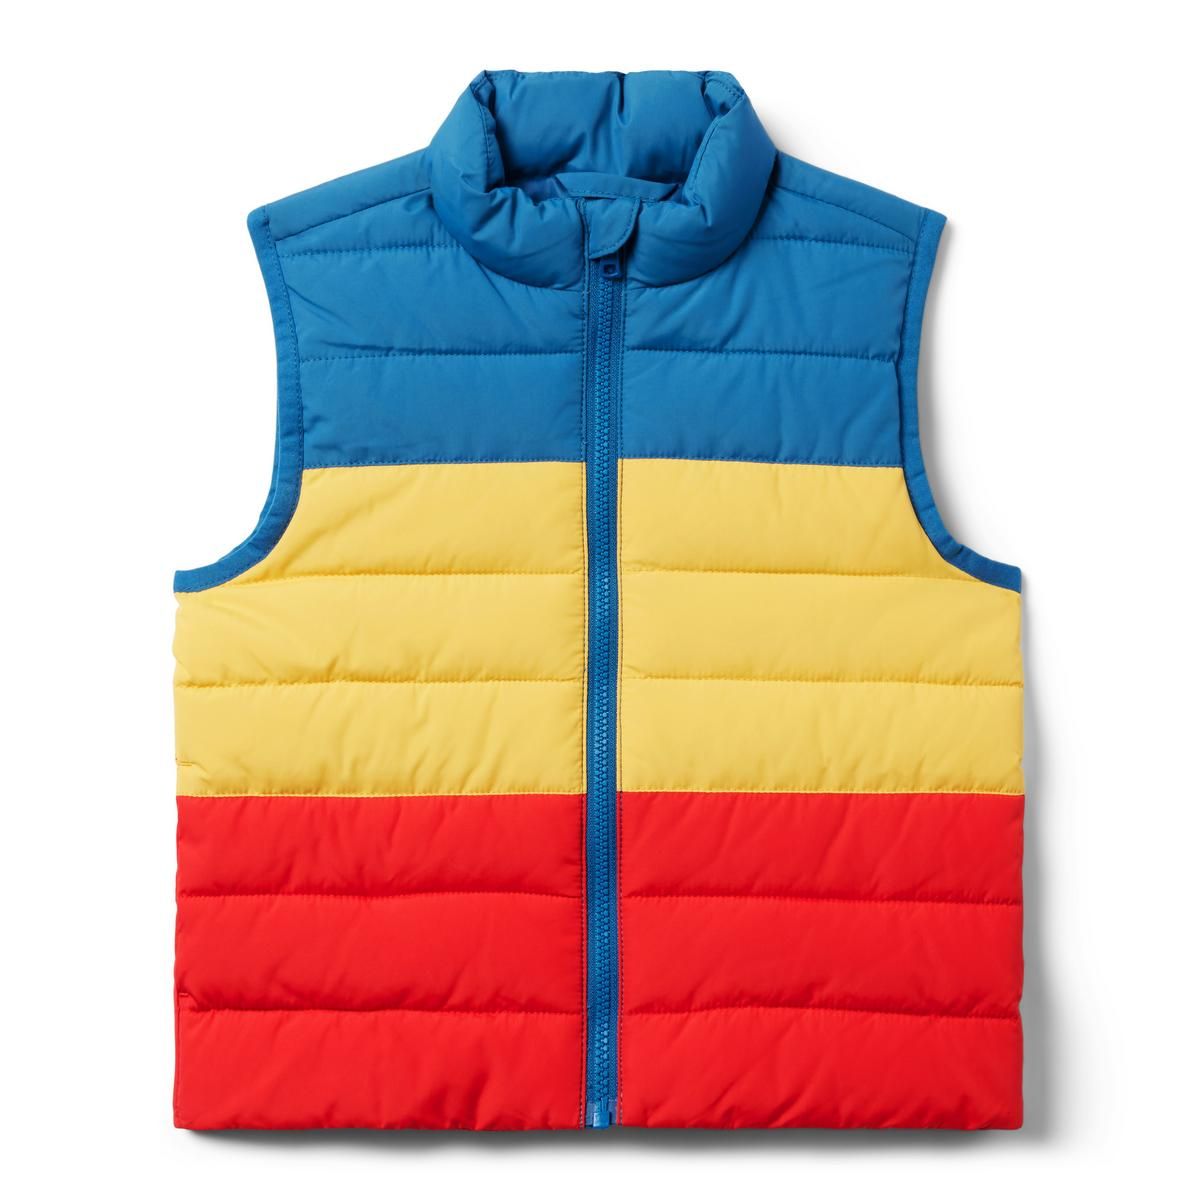 Colorblocked Puffer Vest | Janie and Jack